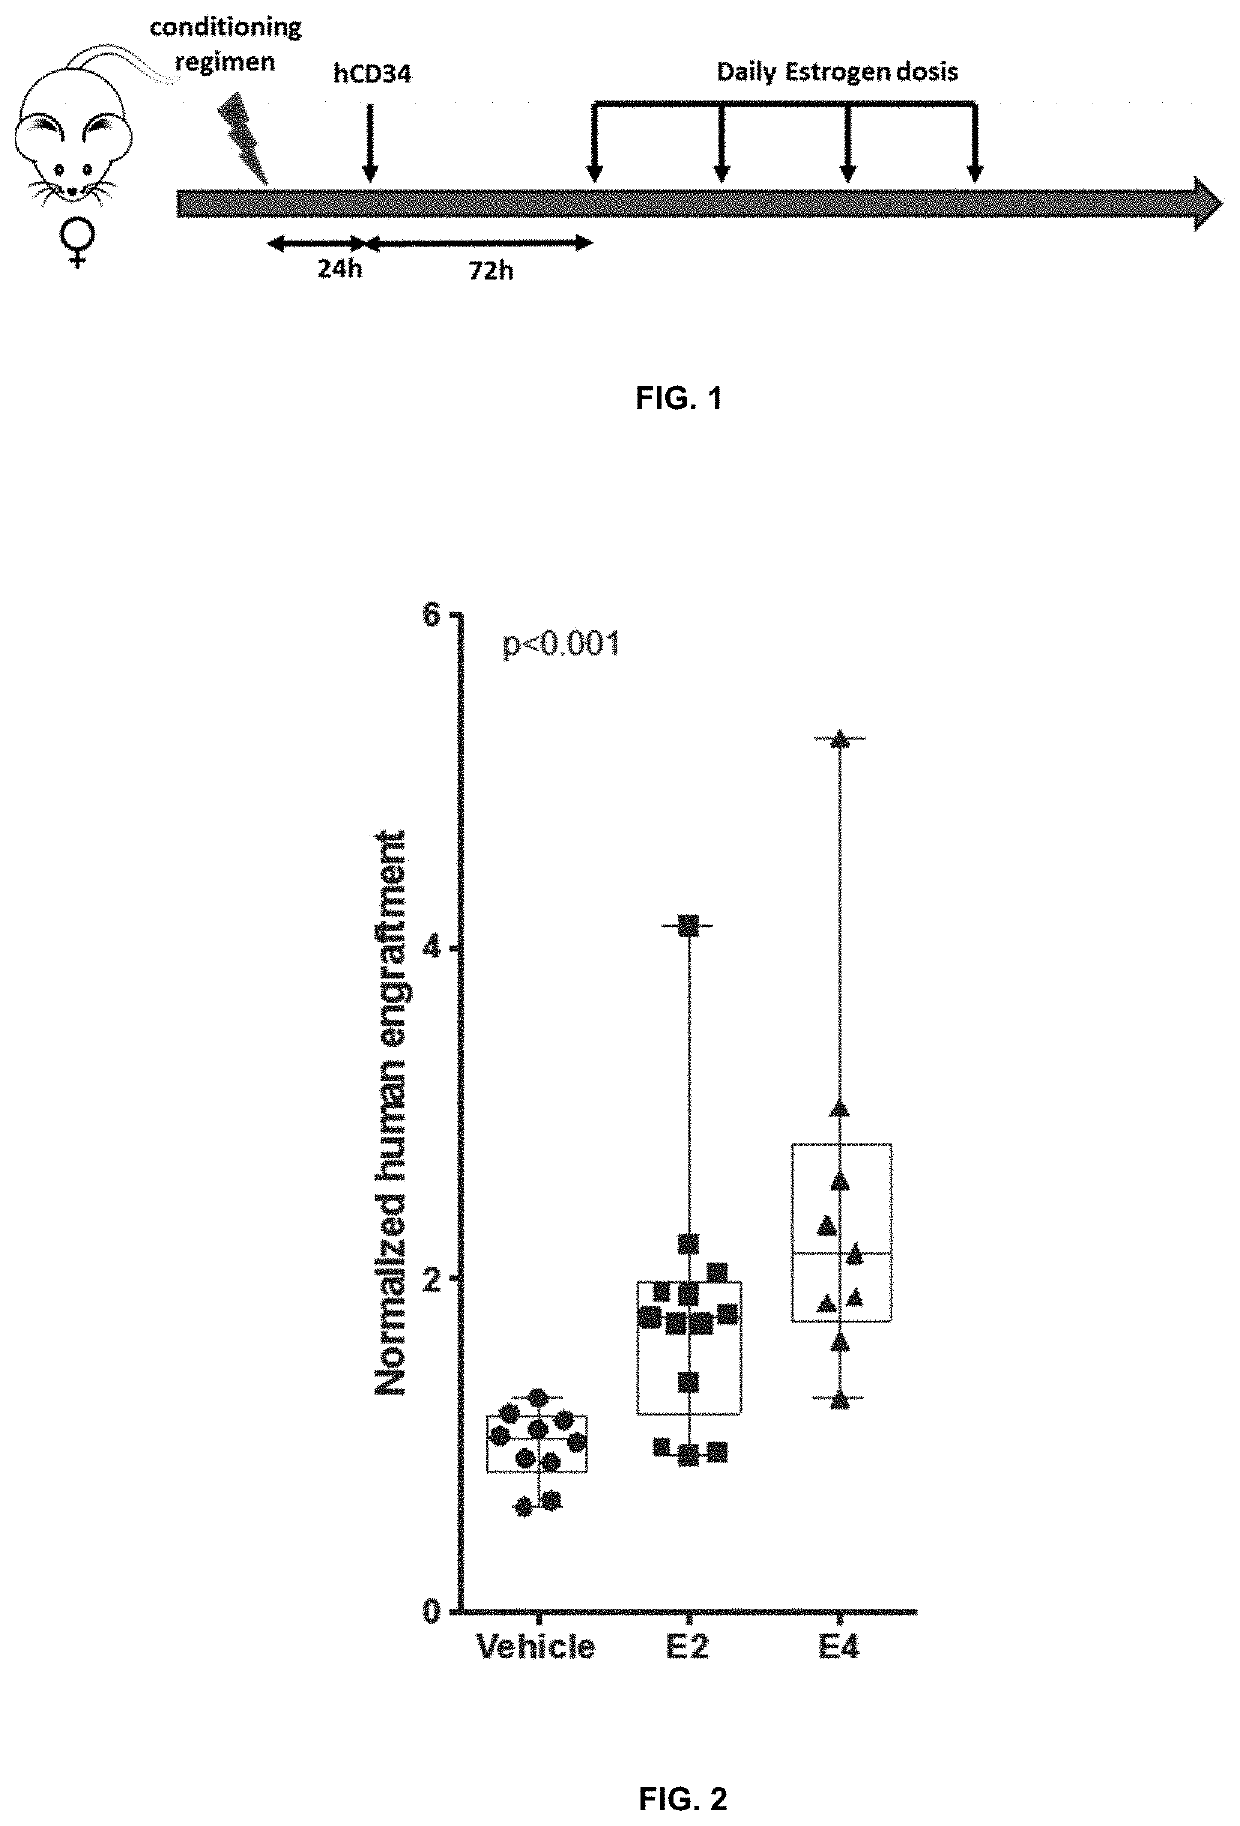 Improvements for performing and facilitating the recovery after hematopoietic stem cell transplantation